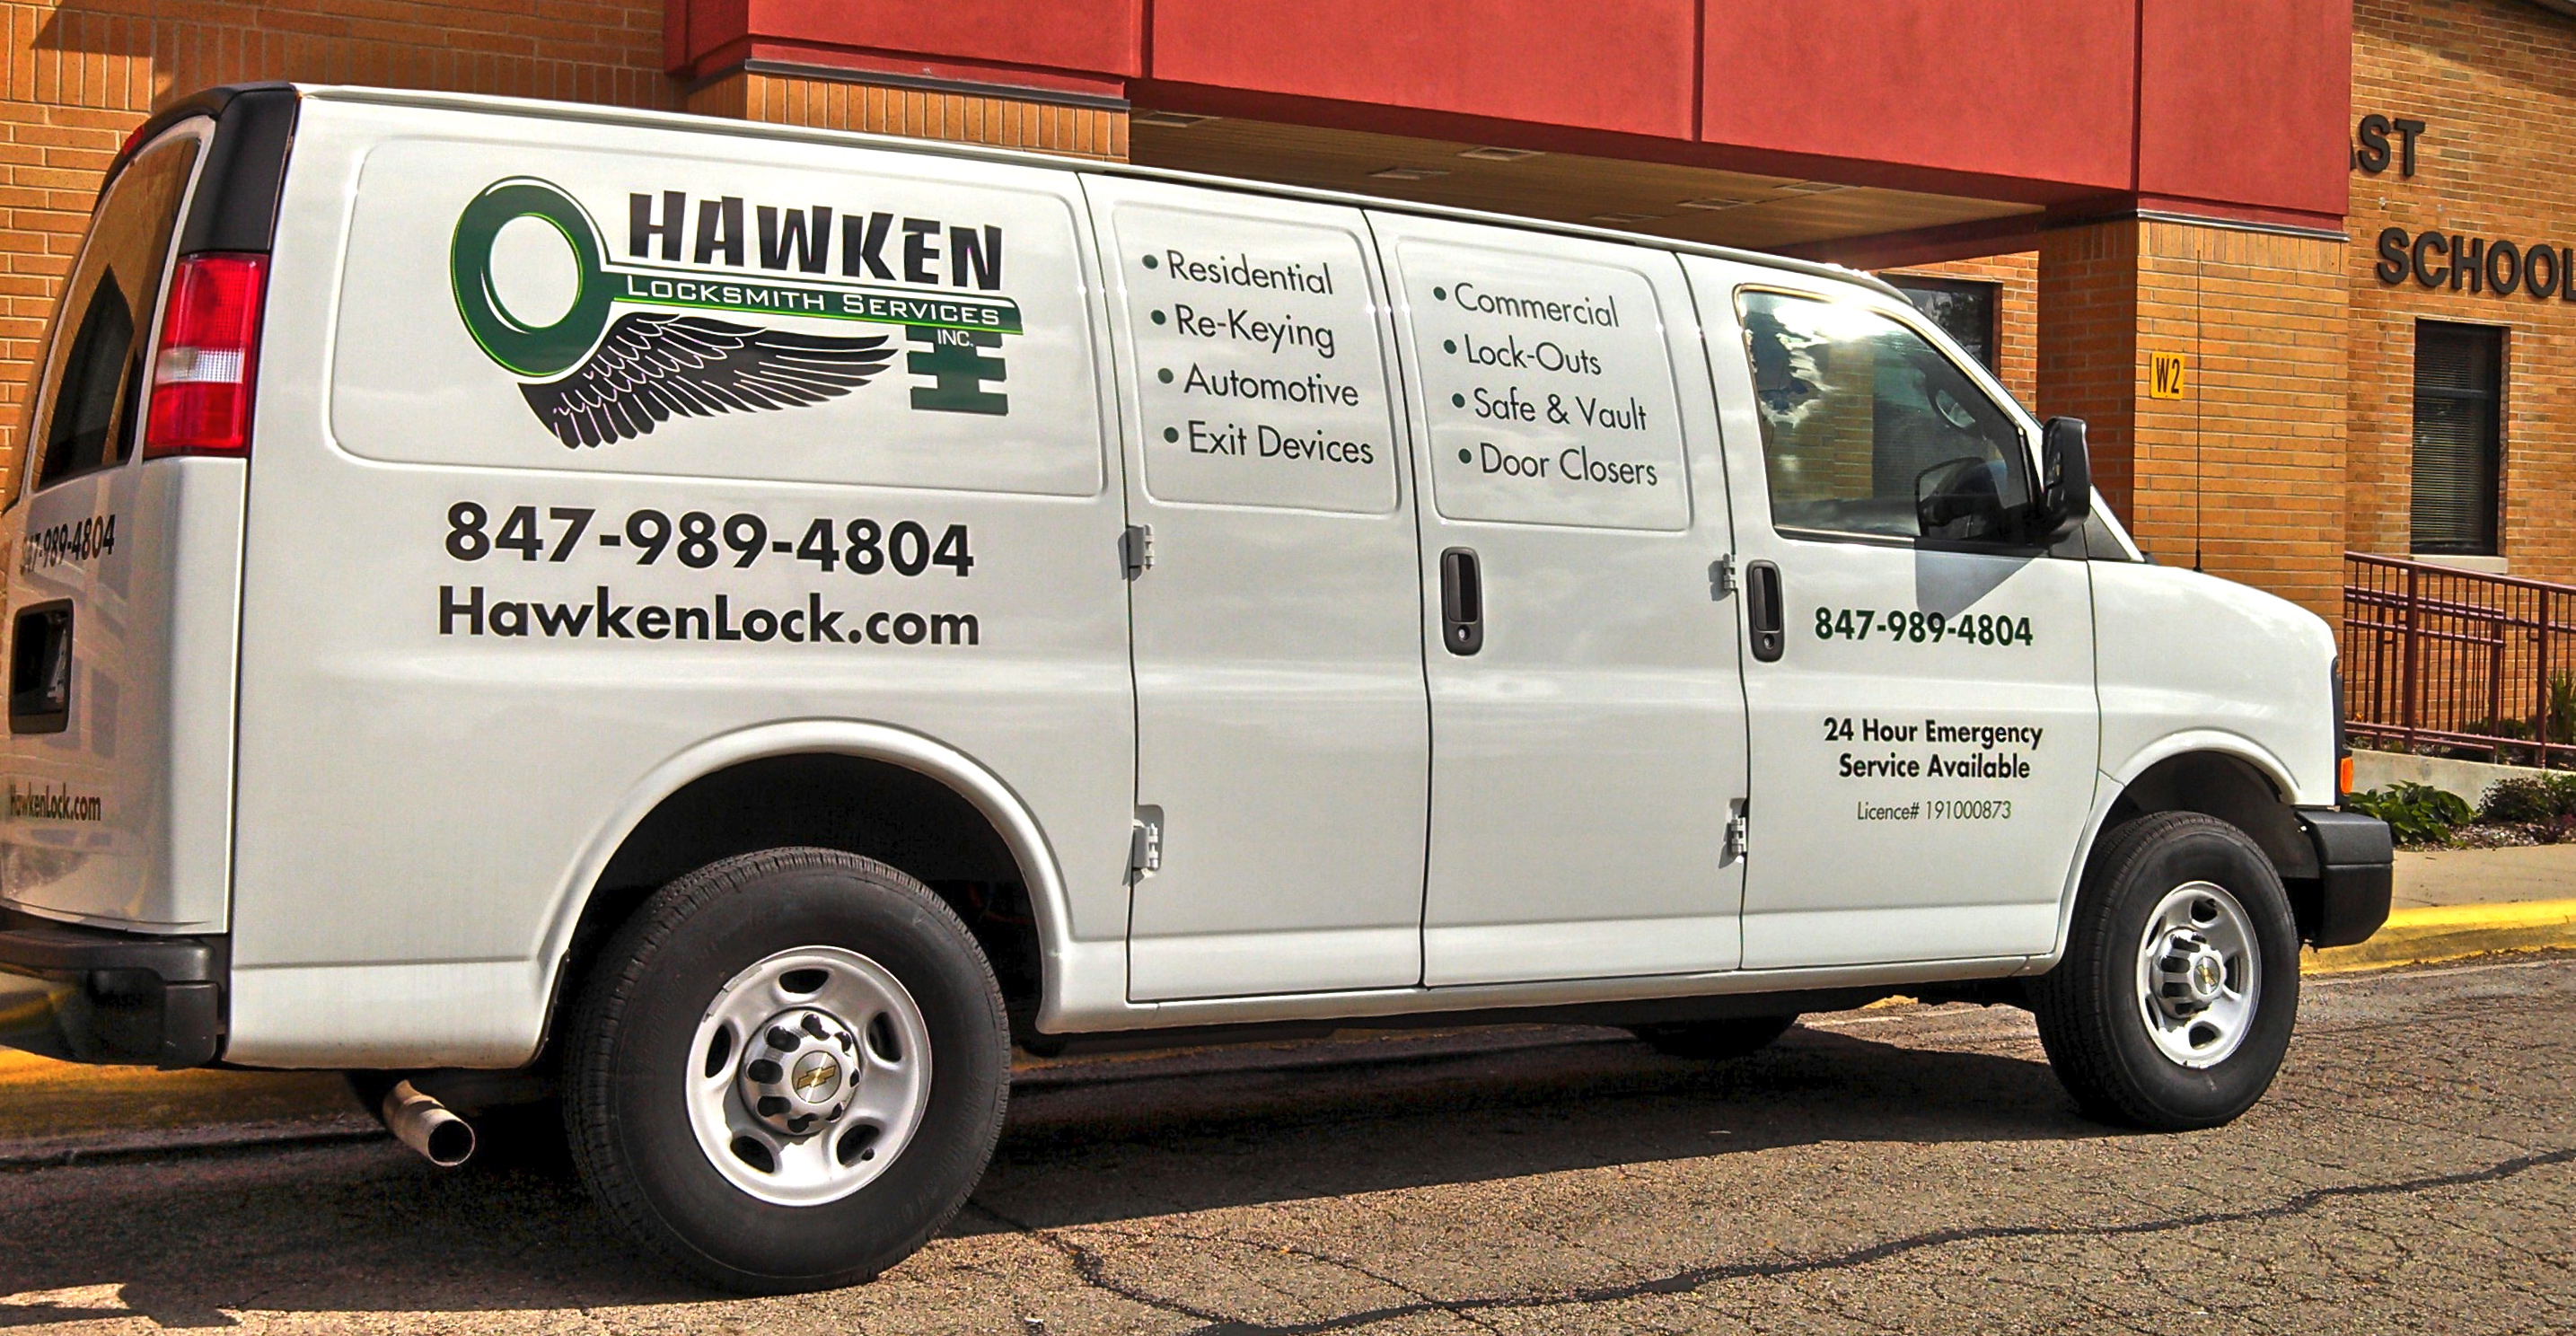 24 hour mobile locksmith near me in Saint Charles, IL